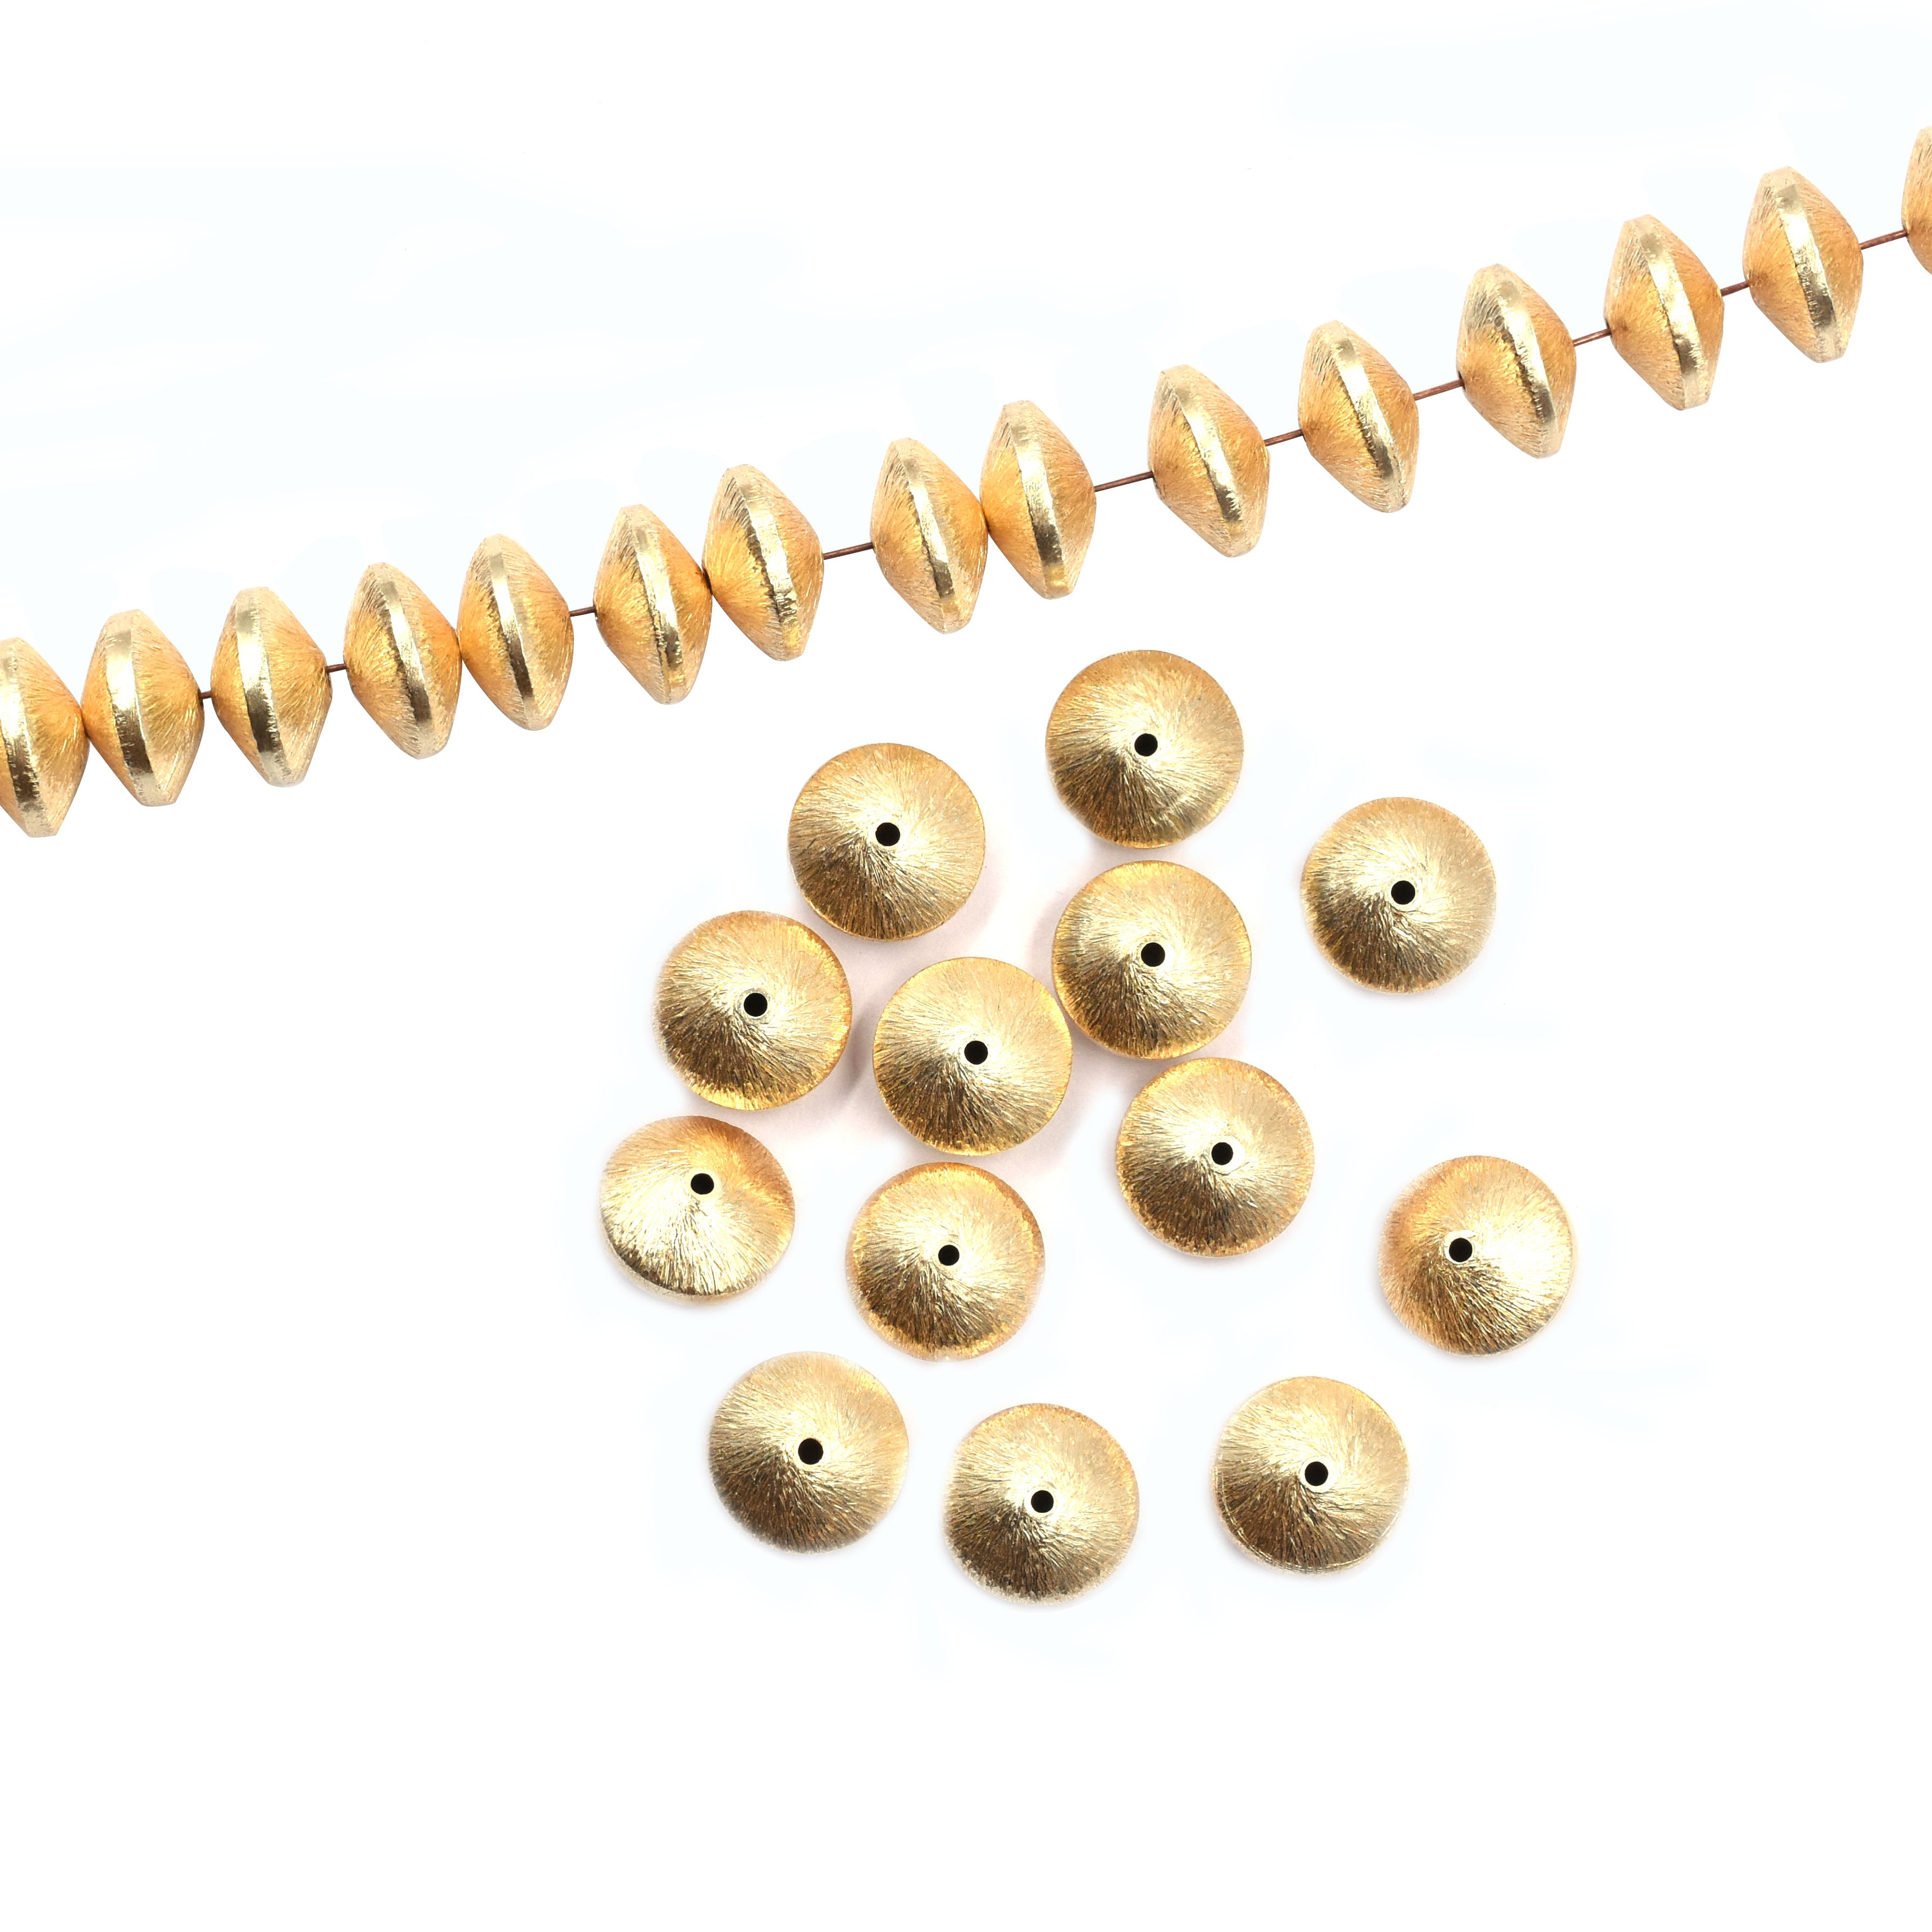 30 Pcs 12mm Bicone Brushed Matte Finish Beads Gold Plated Copper